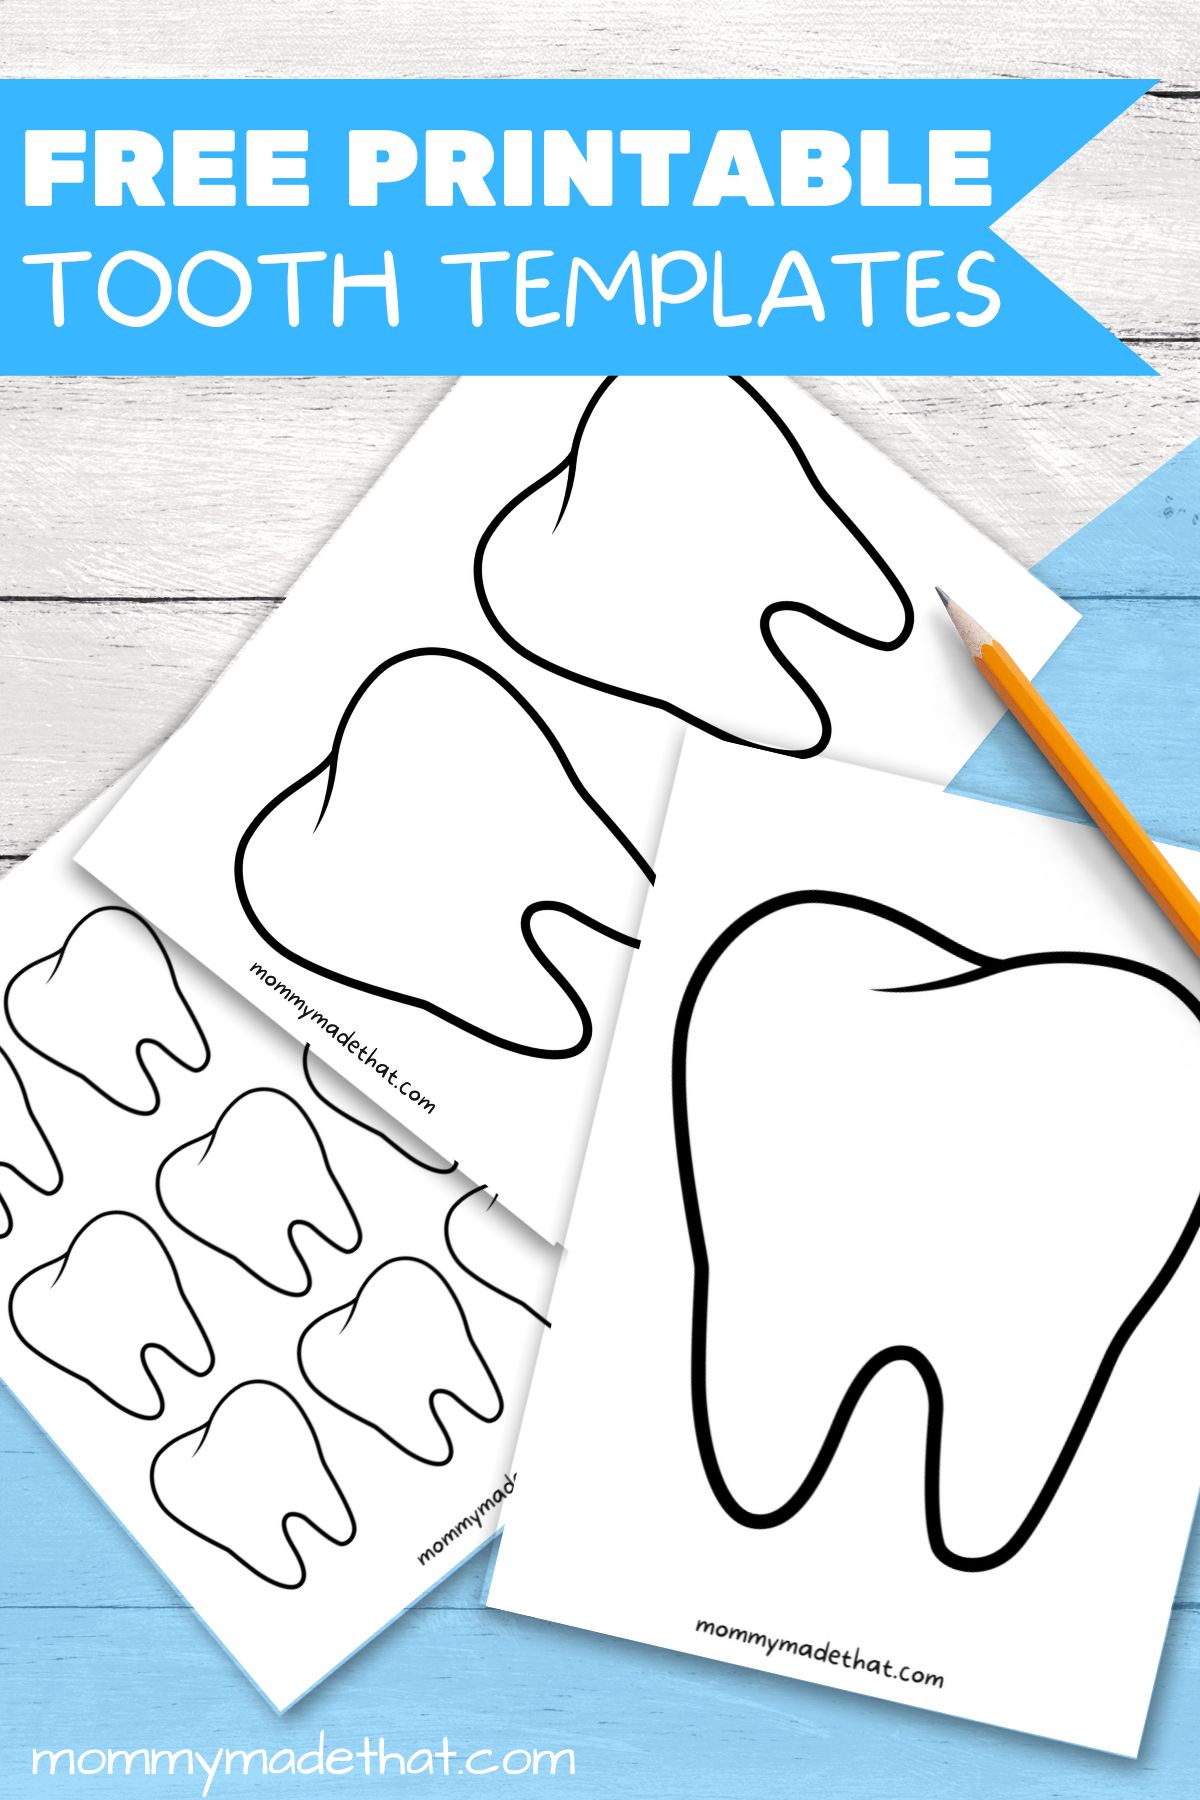 Tooth Templates (Free Printable Outlines!)